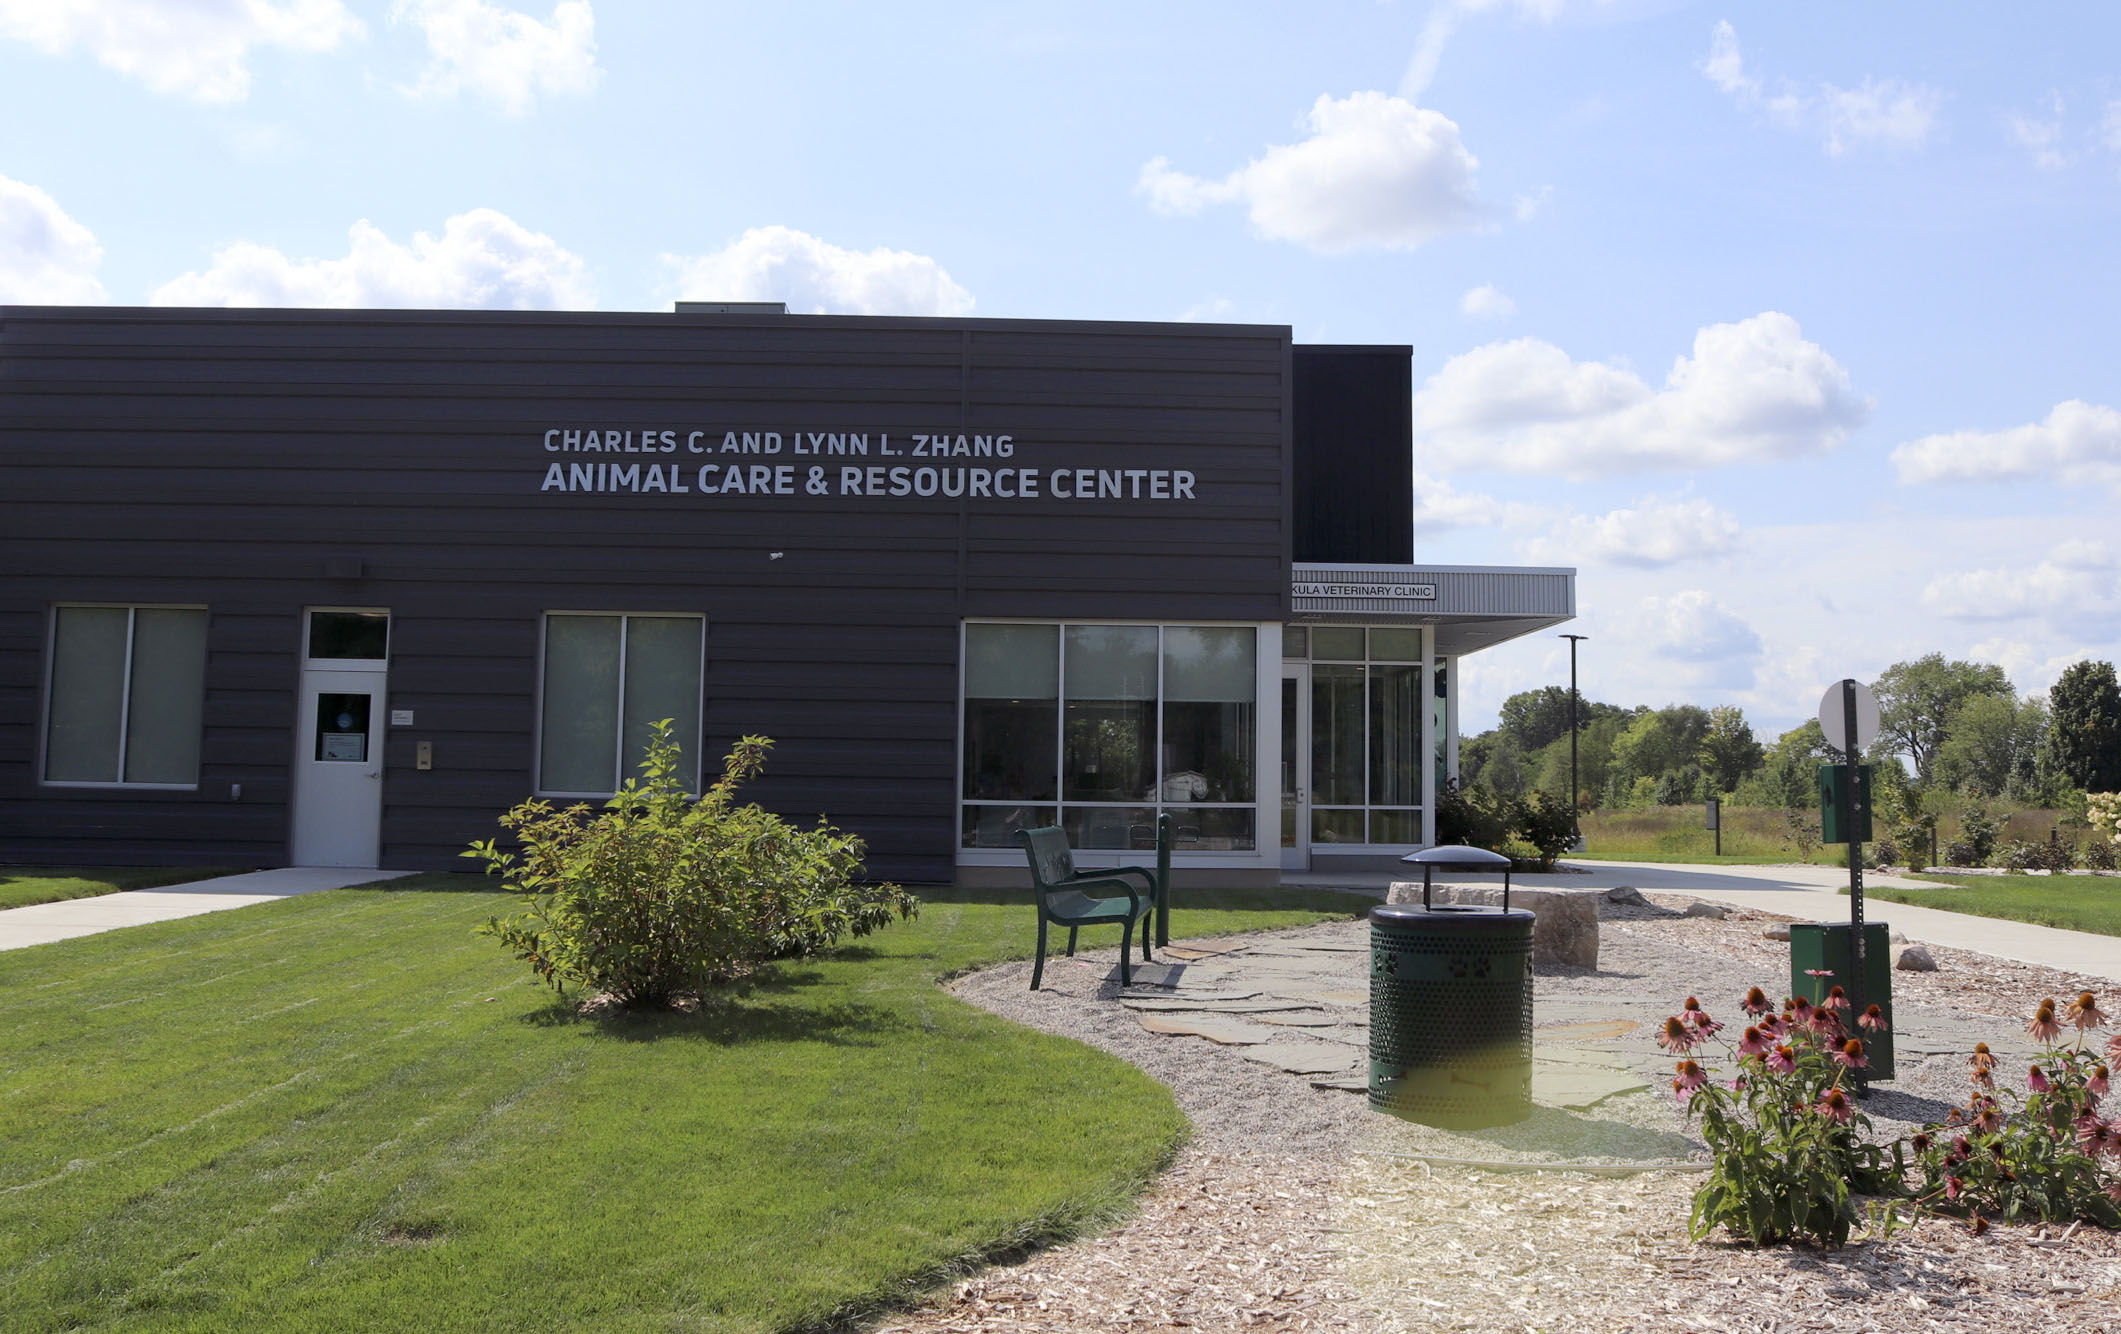 The new Charles and Lynn Zhang Animal Care & Resource Center on Tuesday, Aug. 23, 2022 at 2272 River Street in Kalamazoo. The Kalamazoo Humane Society held the official grand opening for the facility on Saturday, Aug. 20, 2022.